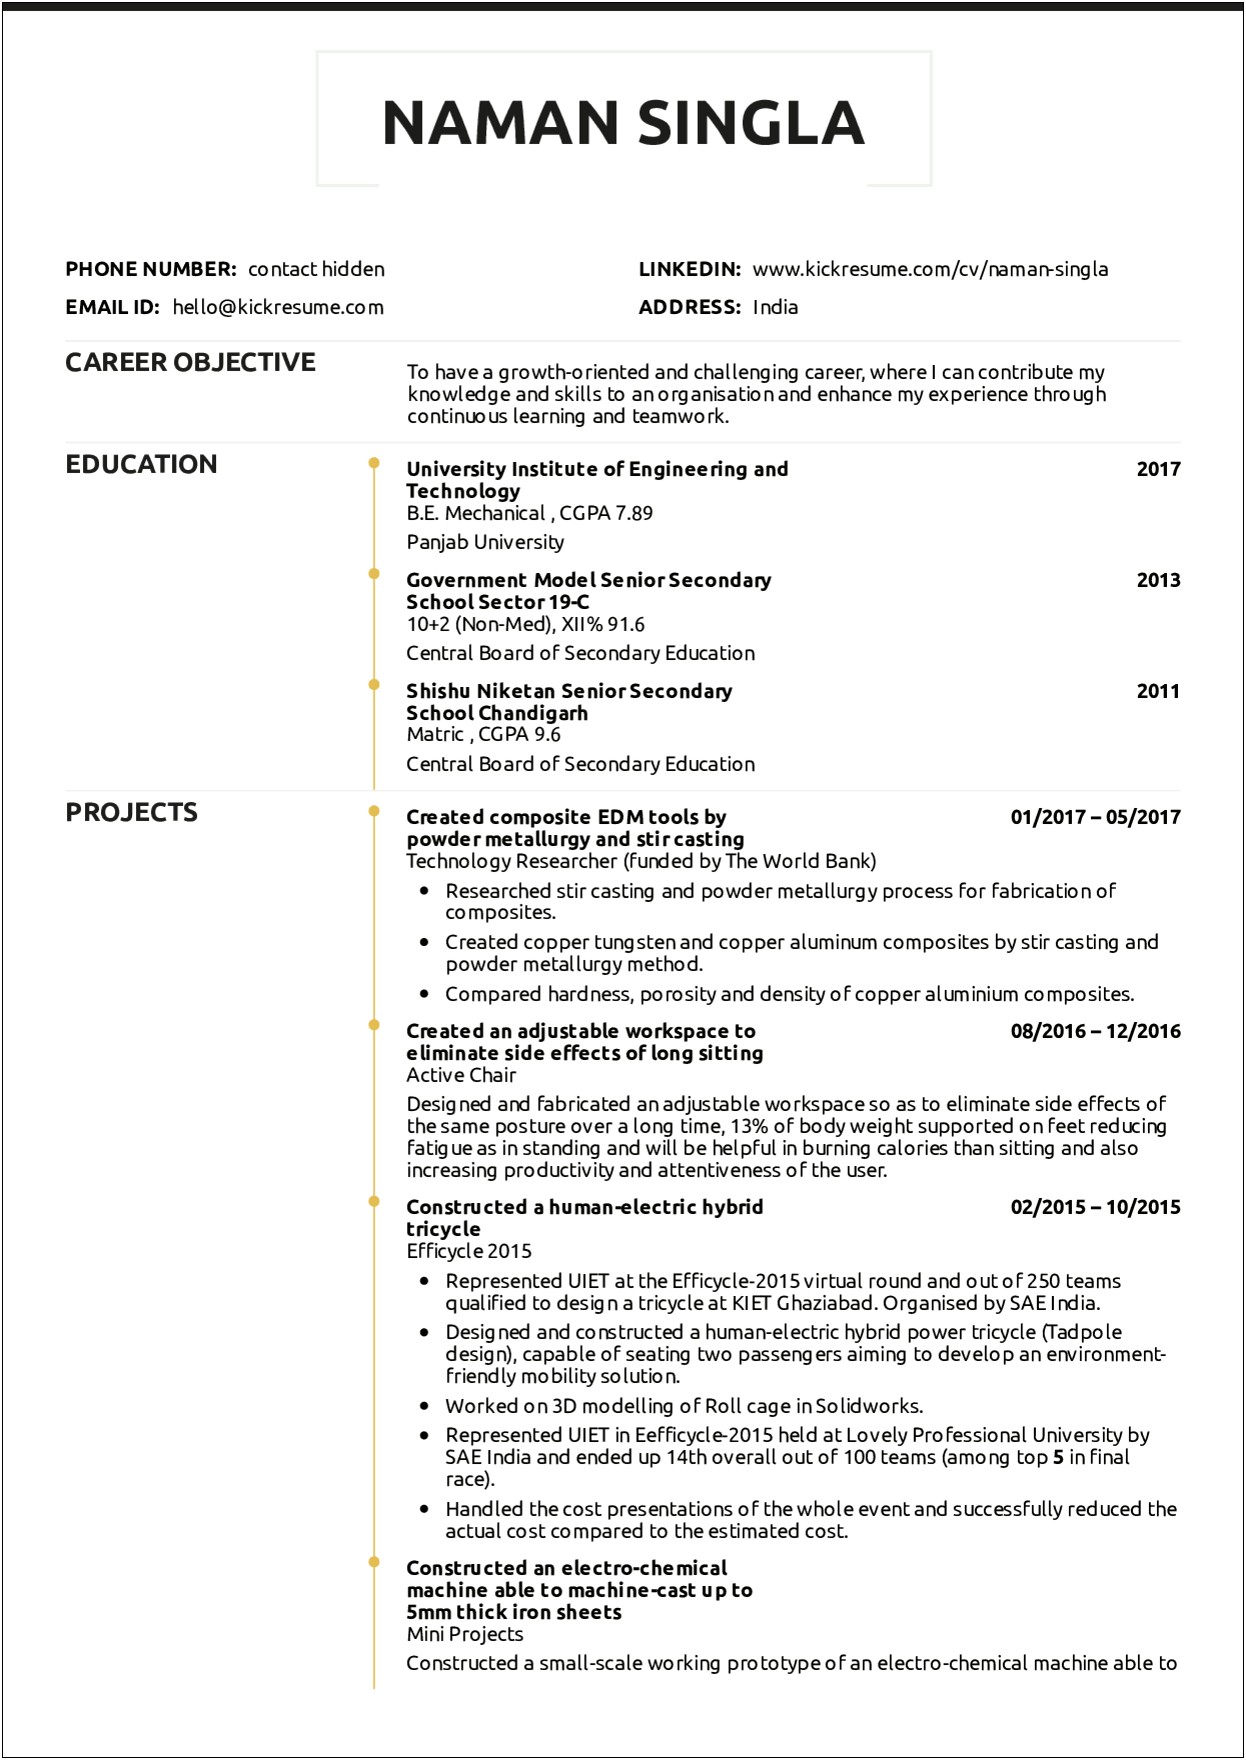 Resume To Get A Job In A Bank